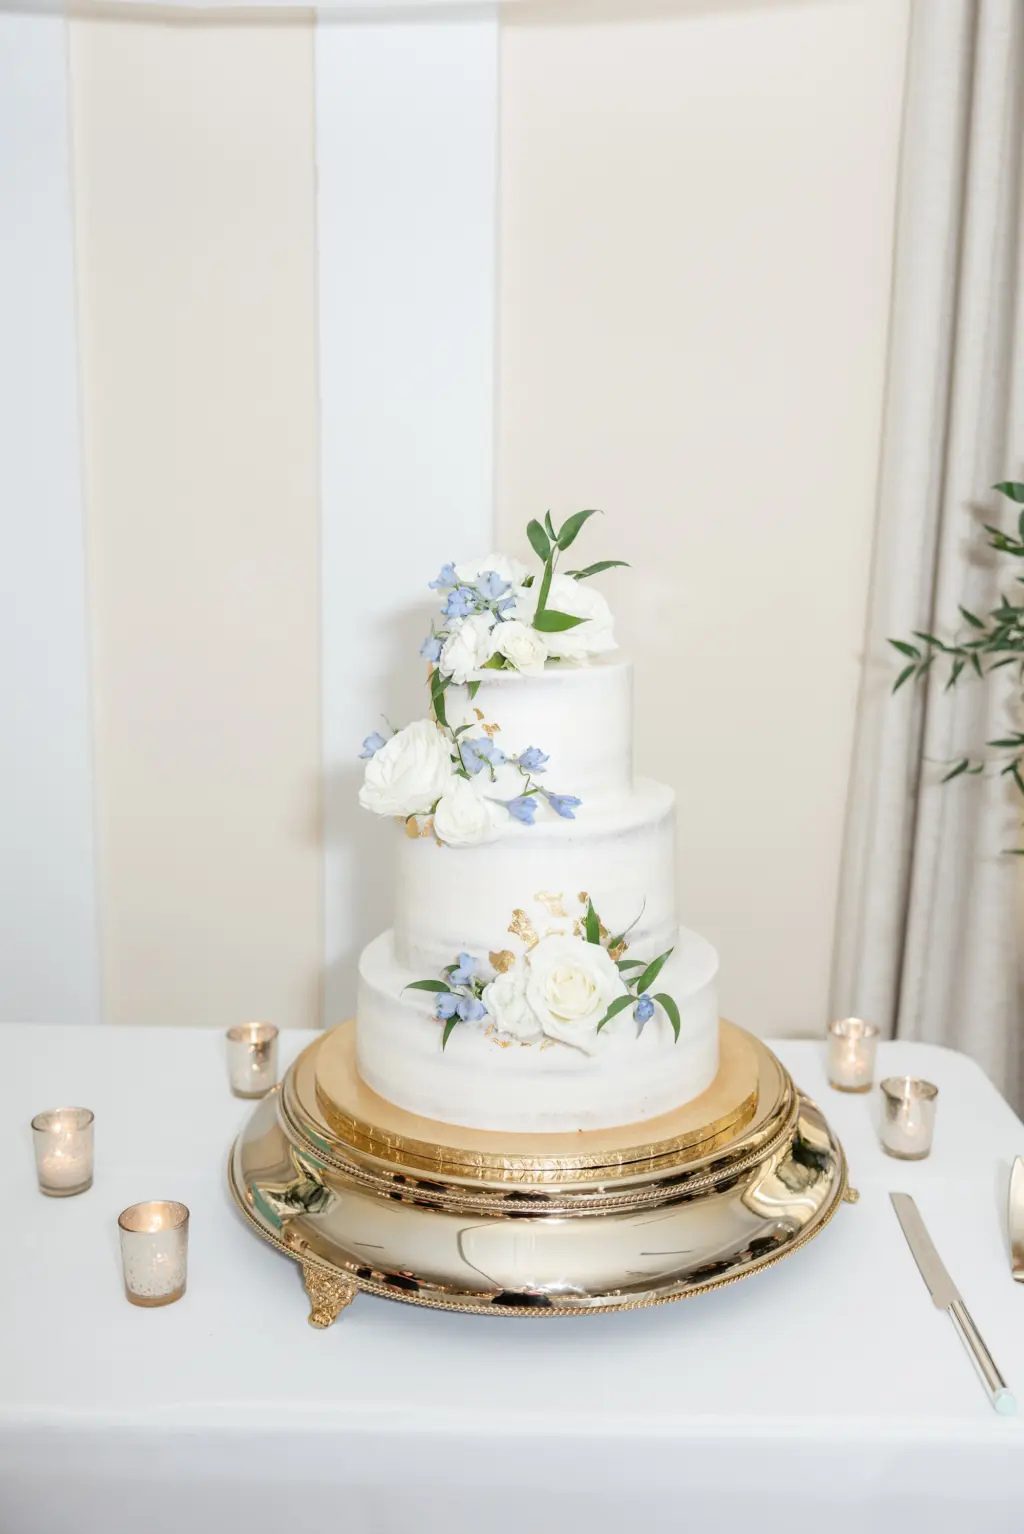 Round Three-tiered Wedding Cake with Blue Floral Accents Ideas